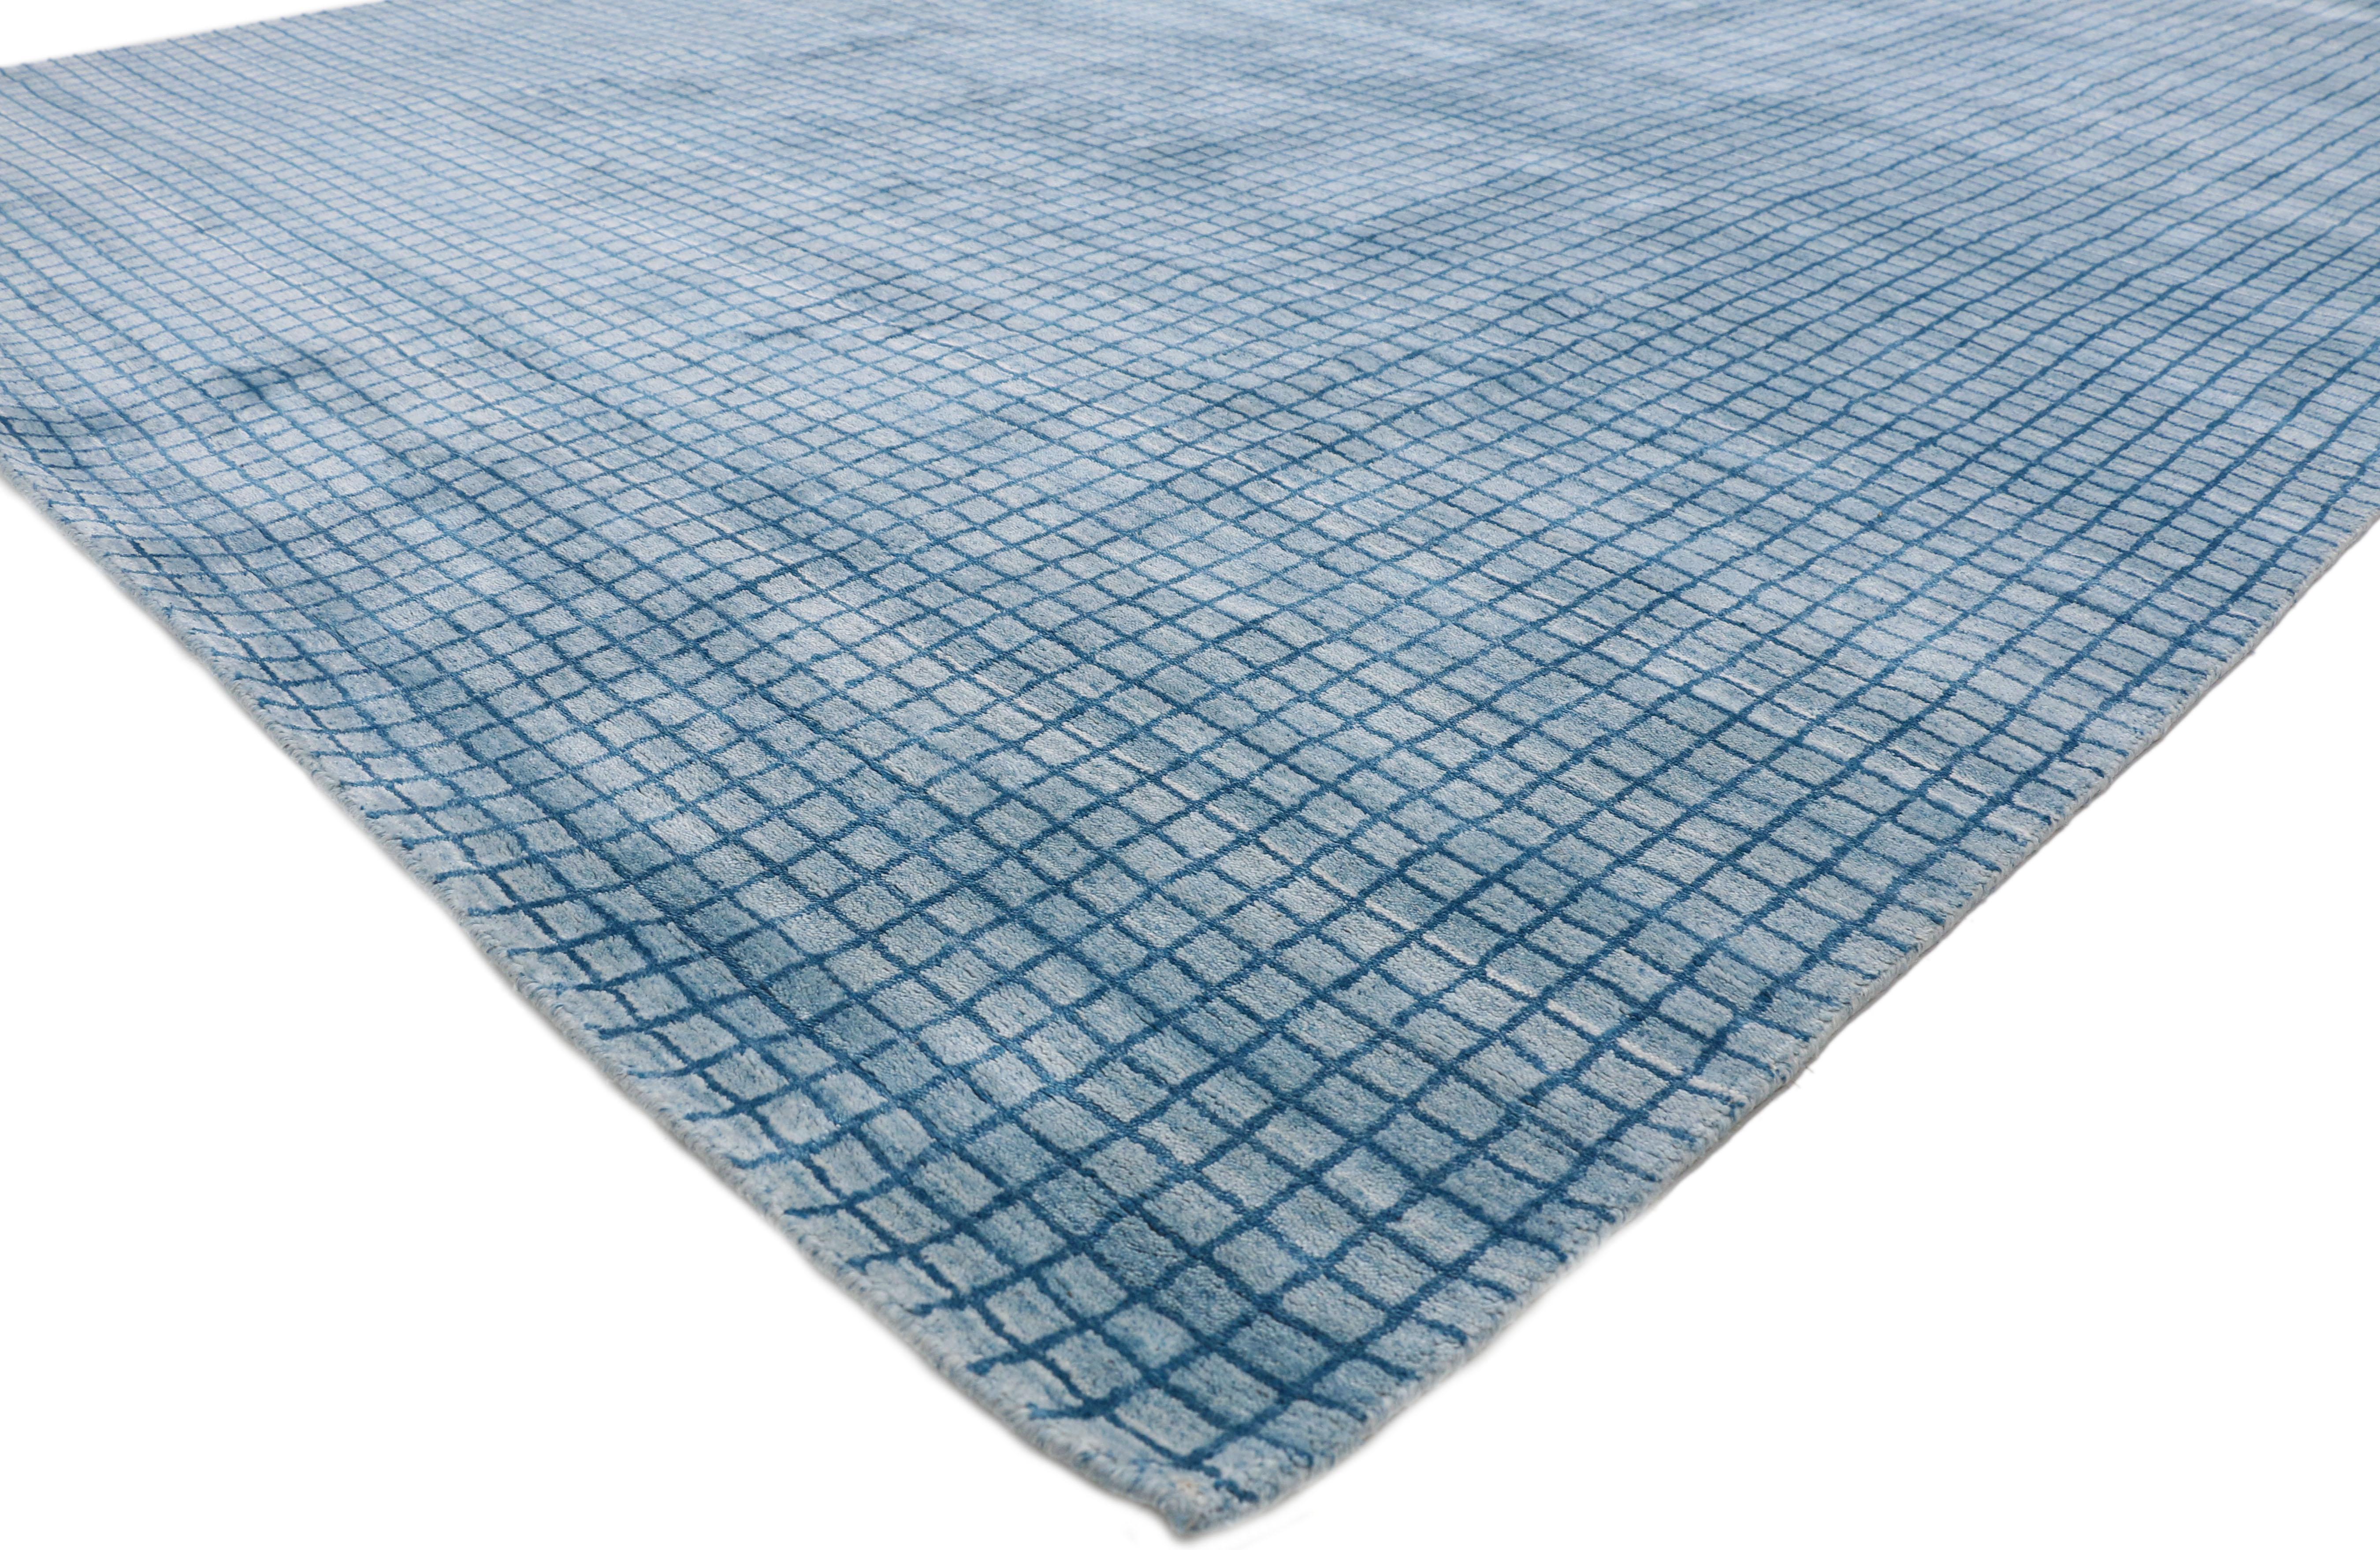 30433 New Contemporary Beach Style Area Rug with grid pattern and coastal living style. This new modern beach style area rug features a simplistic all-over geometric pattern spread across an abrashed light sky blue backdrop the dark cerulean lines